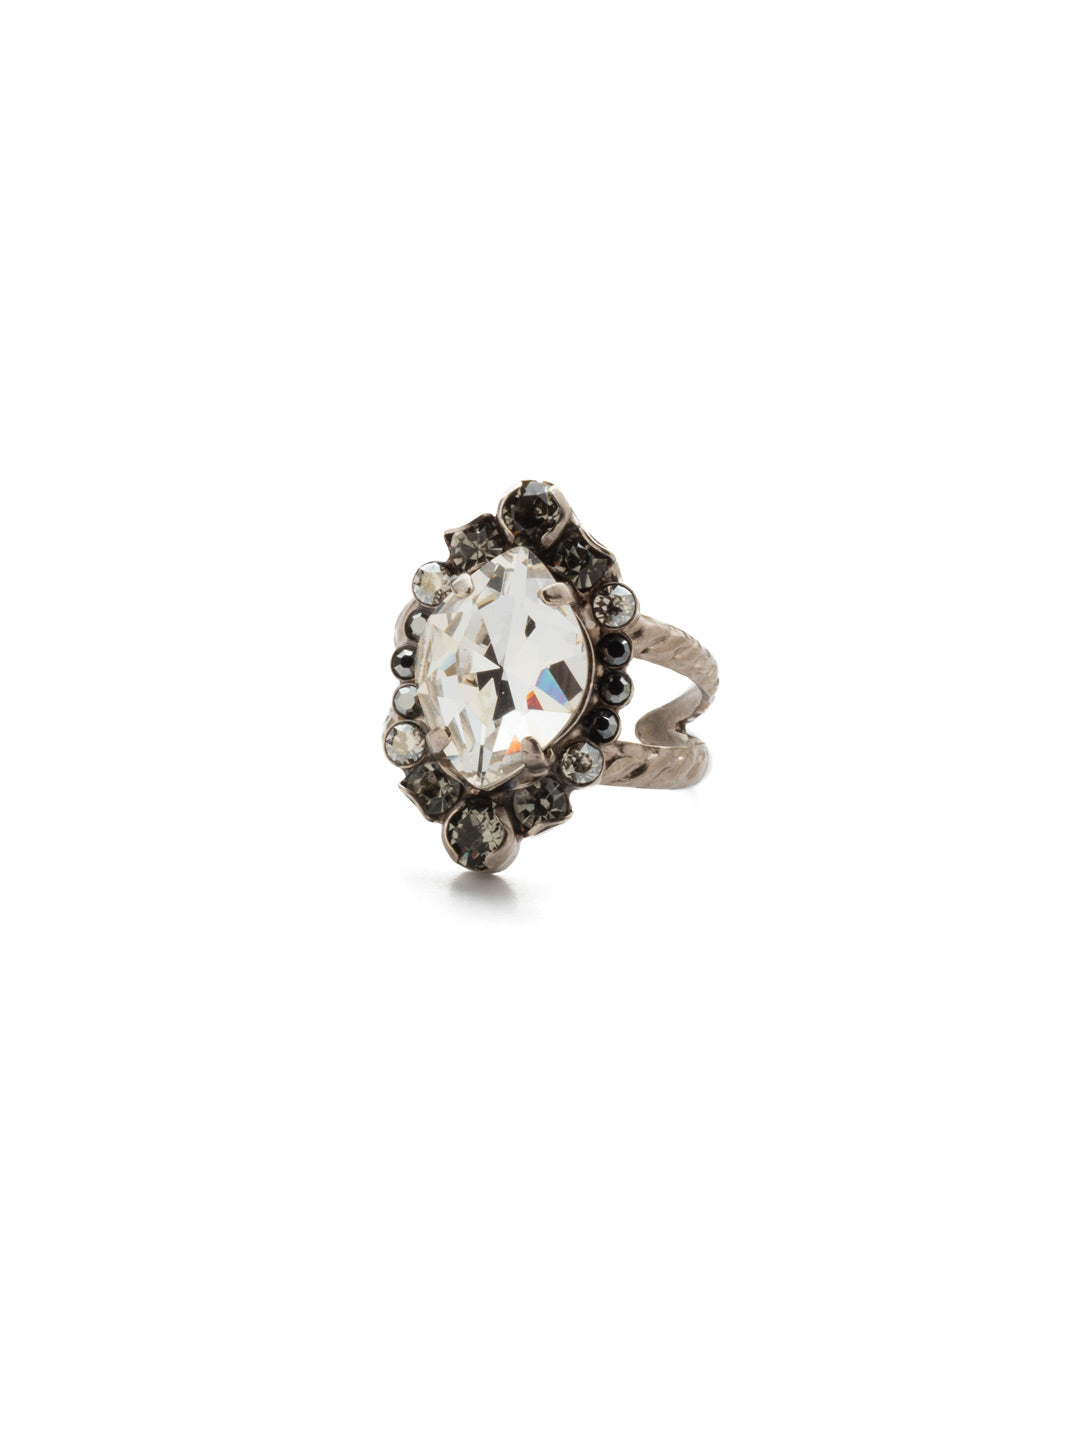 Eustoma Cocktail Ring - RDS44ASCRO - <p>A geometric gem surrounded by petite rounds of alternating colors. This fun ring offers just the right pop of sparkle. From Sorrelli's Crystal Rock collection in our Antique Silver-tone finish.</p>